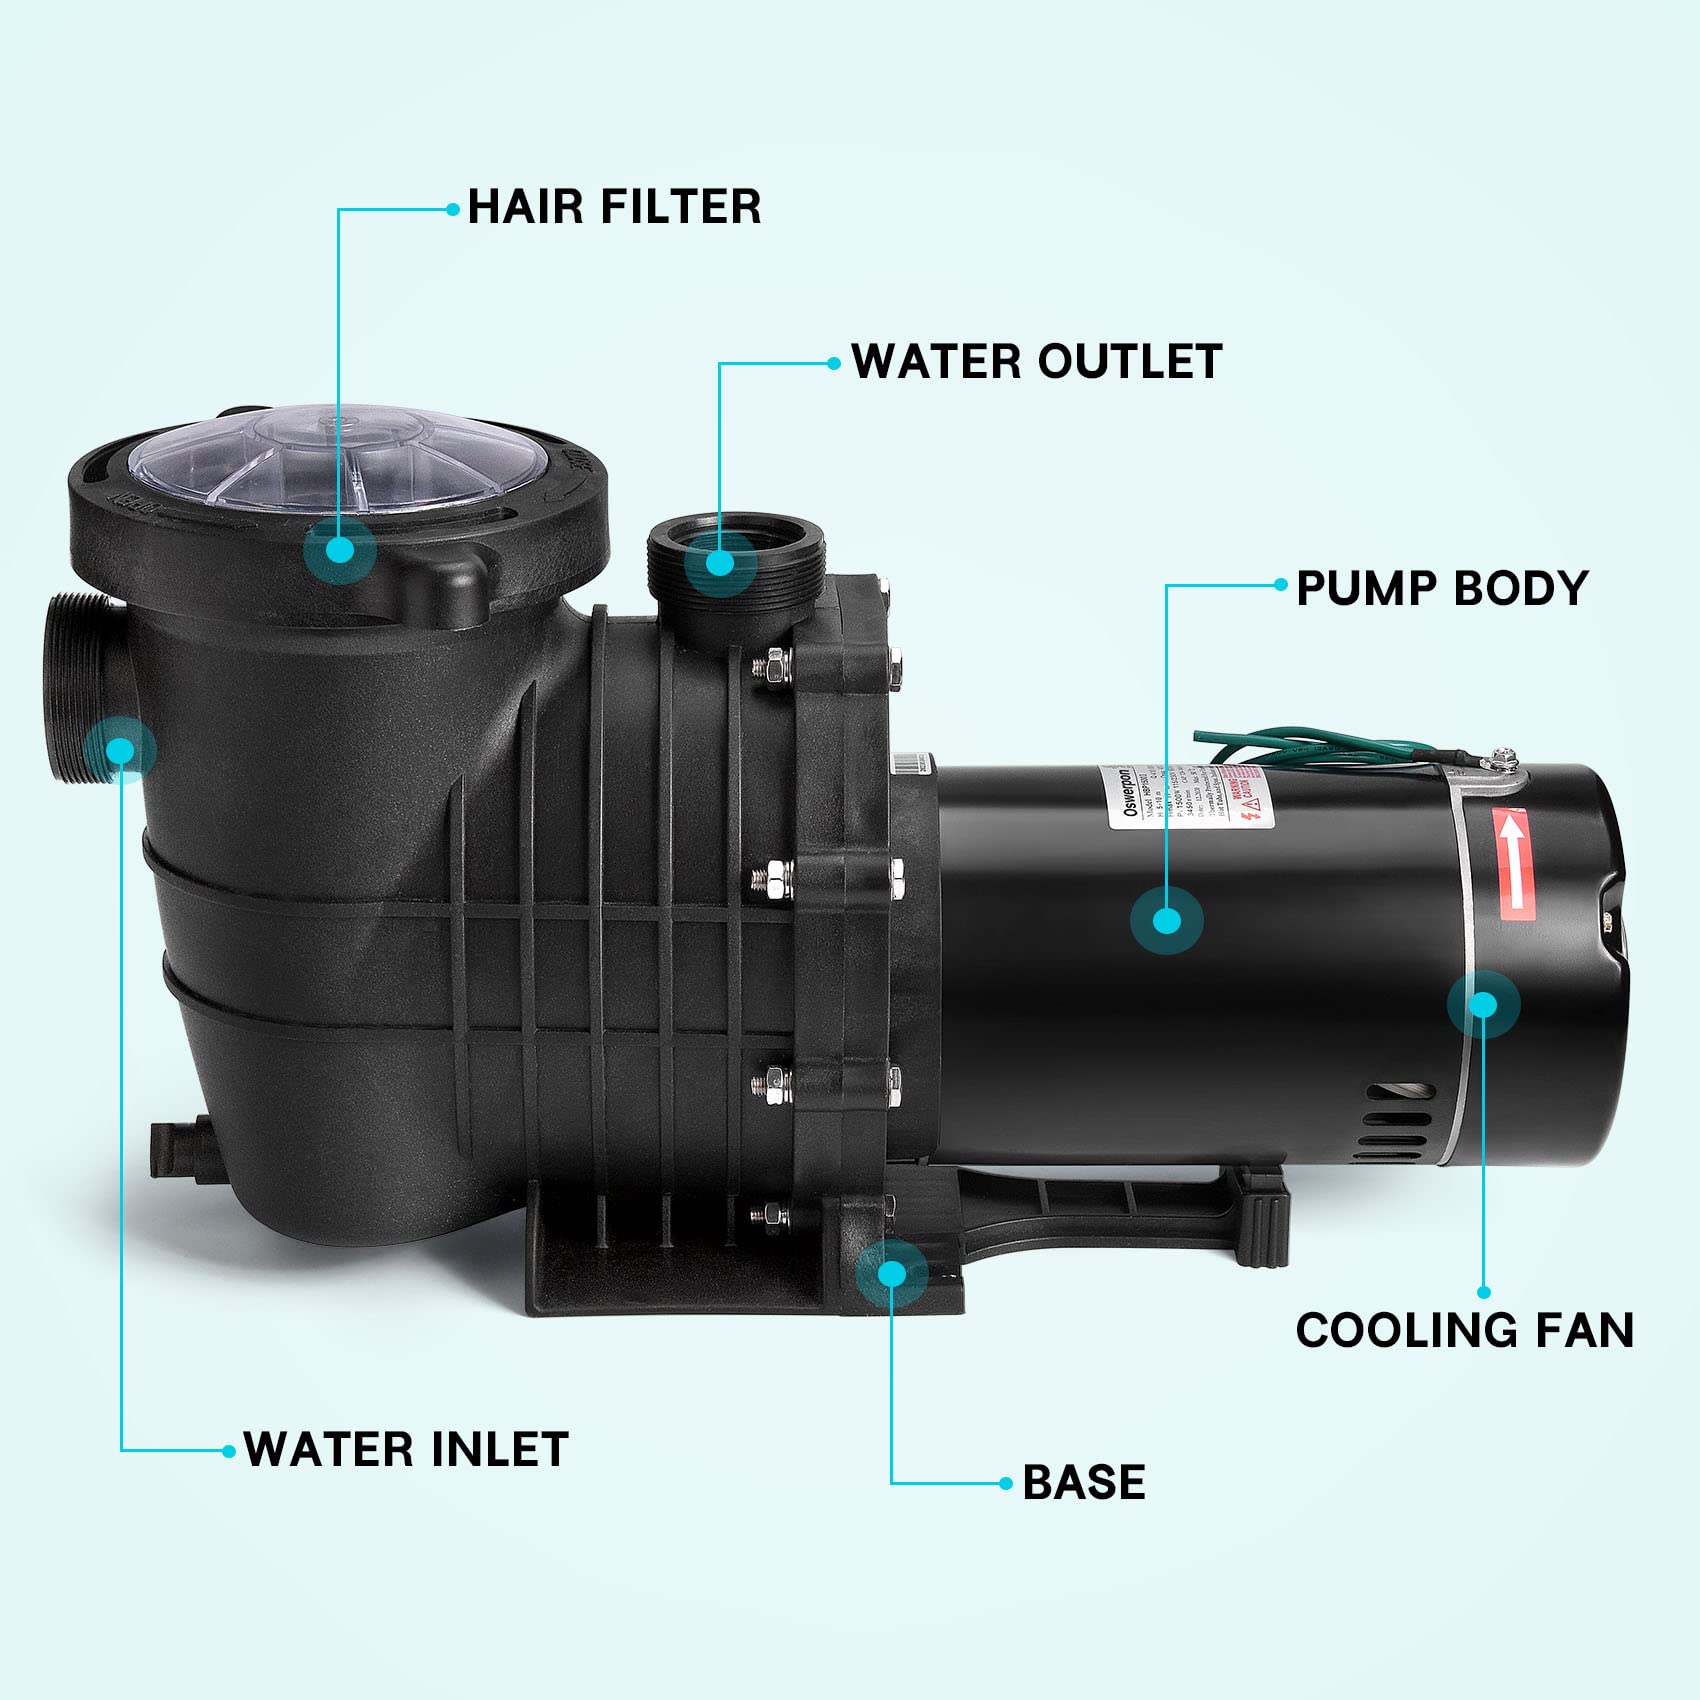 Oswerpon Pool Pump Above Ground/Inground, 1.5 HP 5400GPH Powerful Selfpriming Pool Pumps for 15,000-31,000 Gallons Pools, Dual V